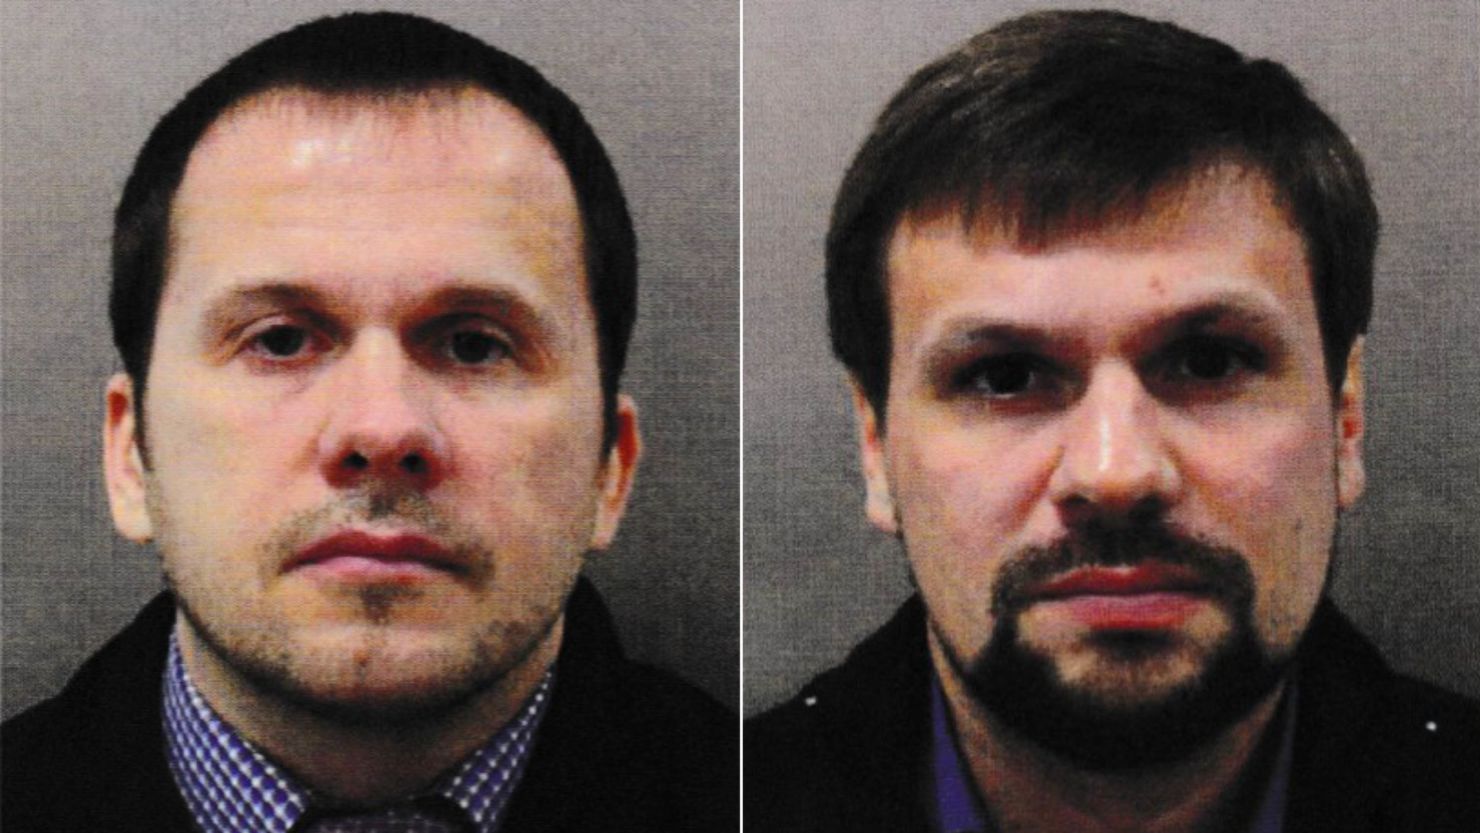 Salisbury attack suspects, Alexander Petrov and Ruslan Boshirov, claimed they briefly visited the historic cathedral city as tourists.